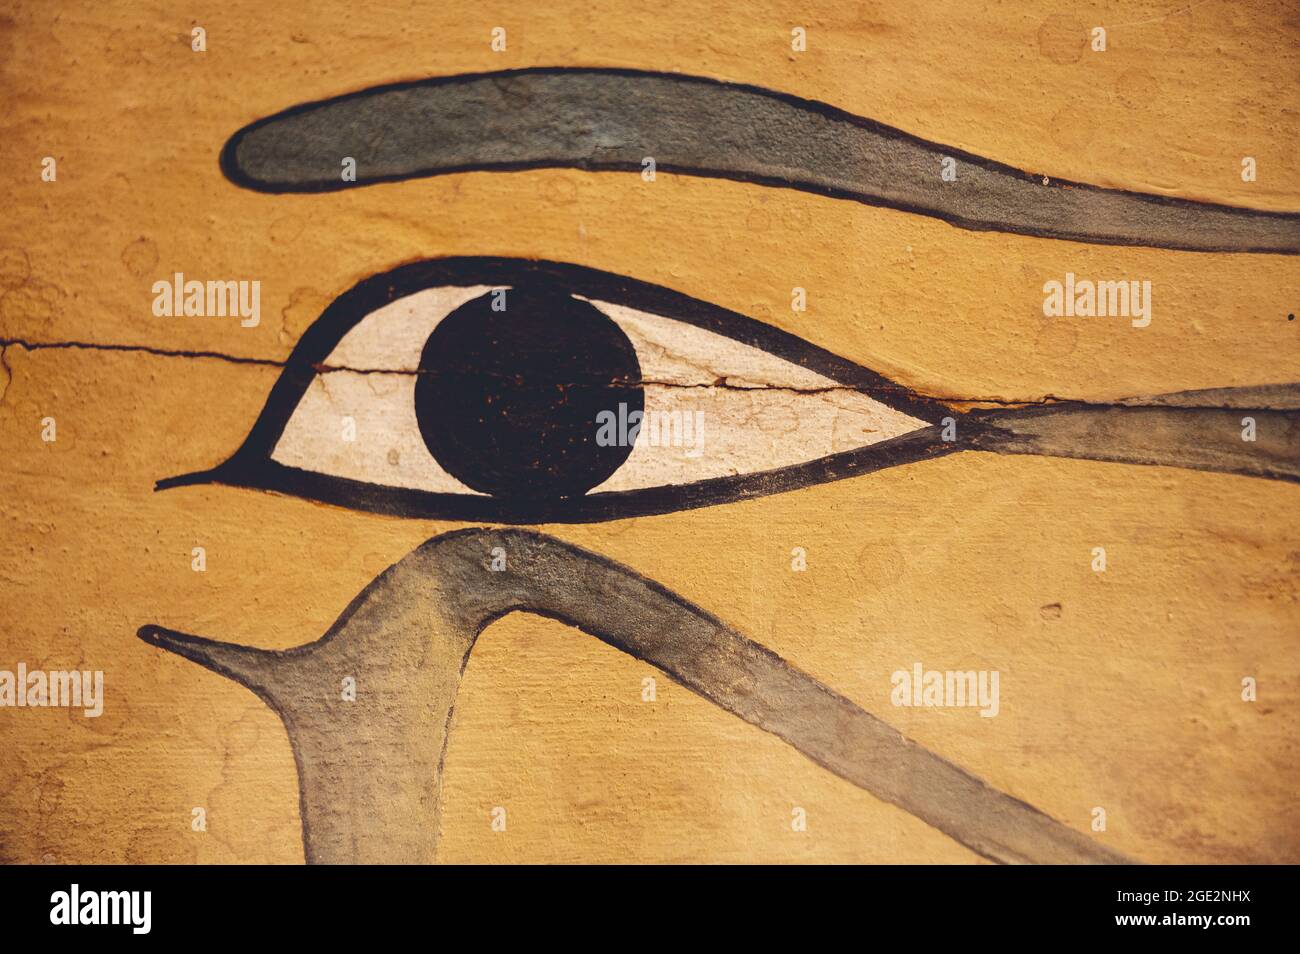 CAIRO, EGYPT - Jun 06, 2021: A closeup of an eye of Horus symbol on an aged orange  stone surface in the Egyptian Museum in Cairo Stock Photo